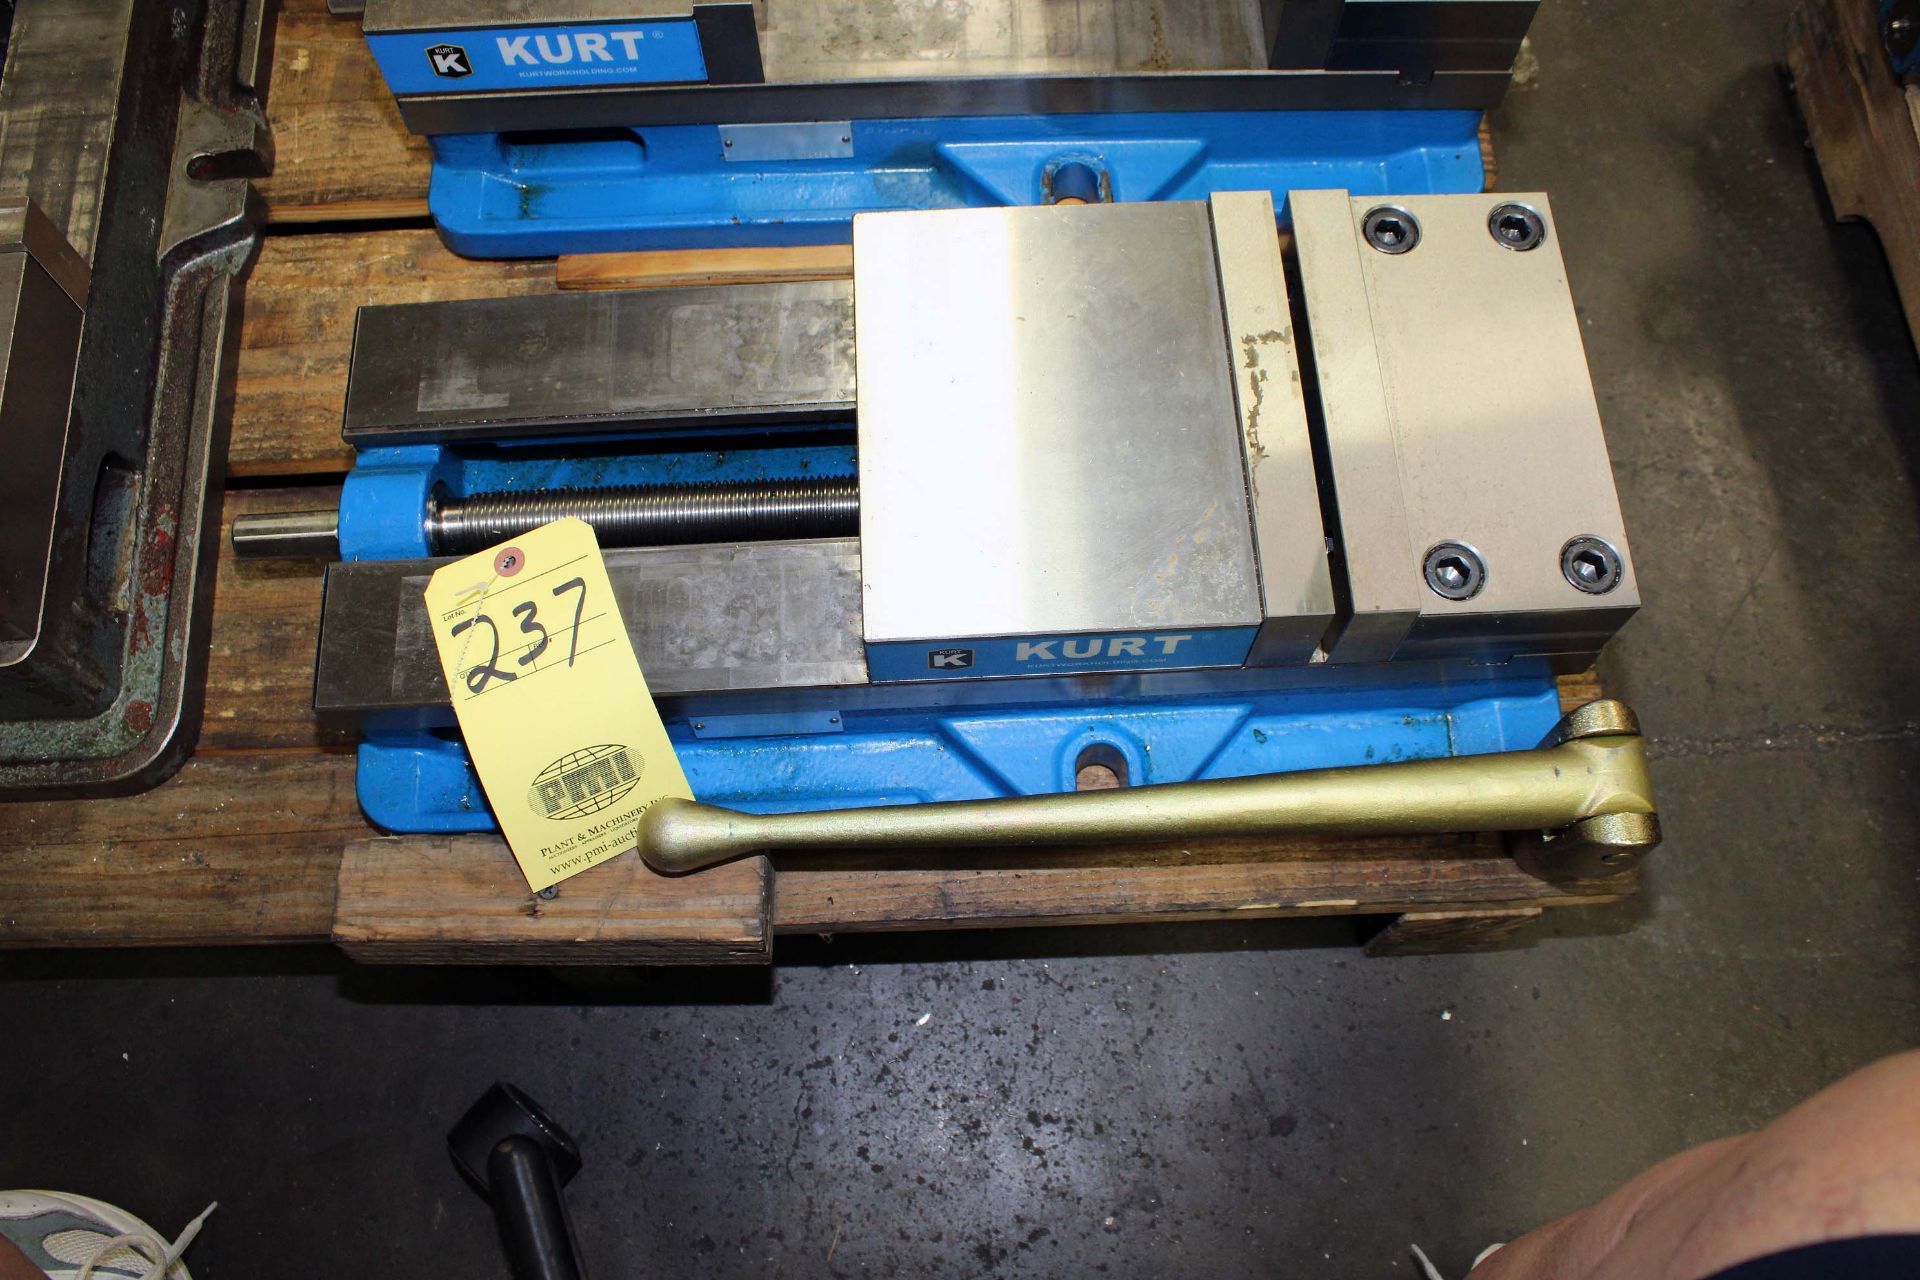 VISE, KURT 10", 9-3/4" jaw opening, 2-1/2" jaw height, 80,000 PSI max. clamping force